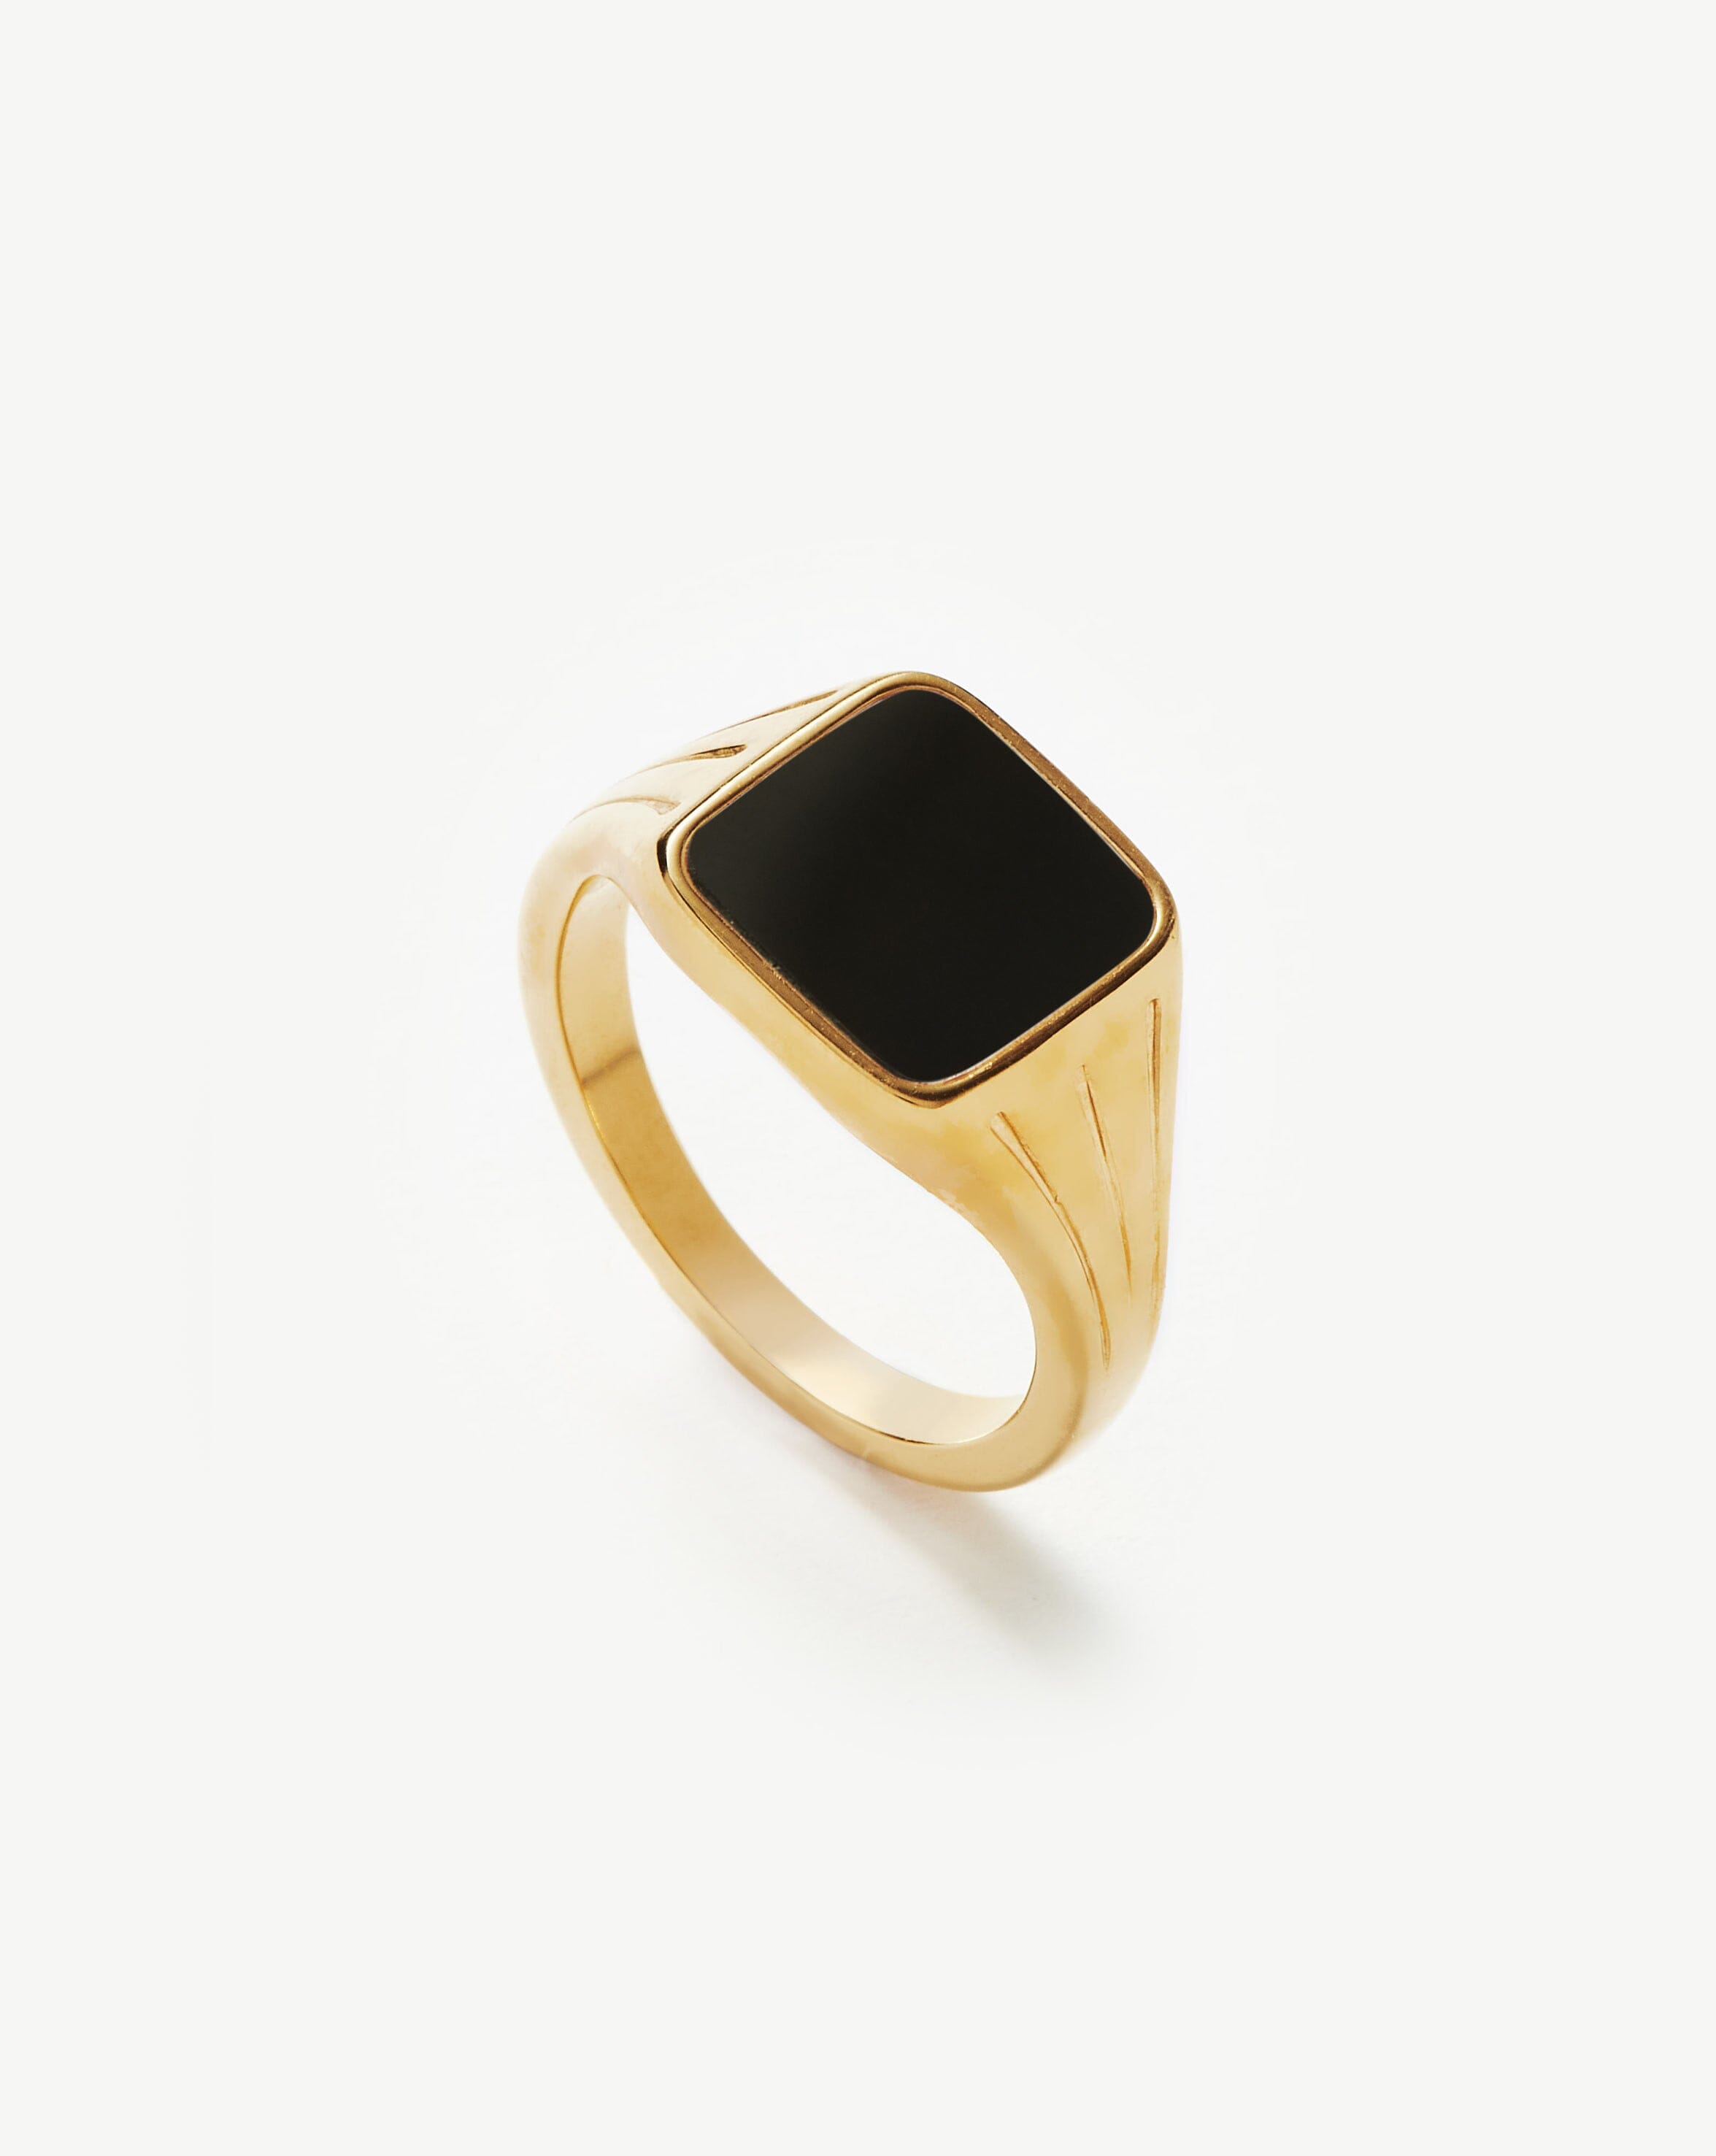 Engraved Onyx Square Signet Ring